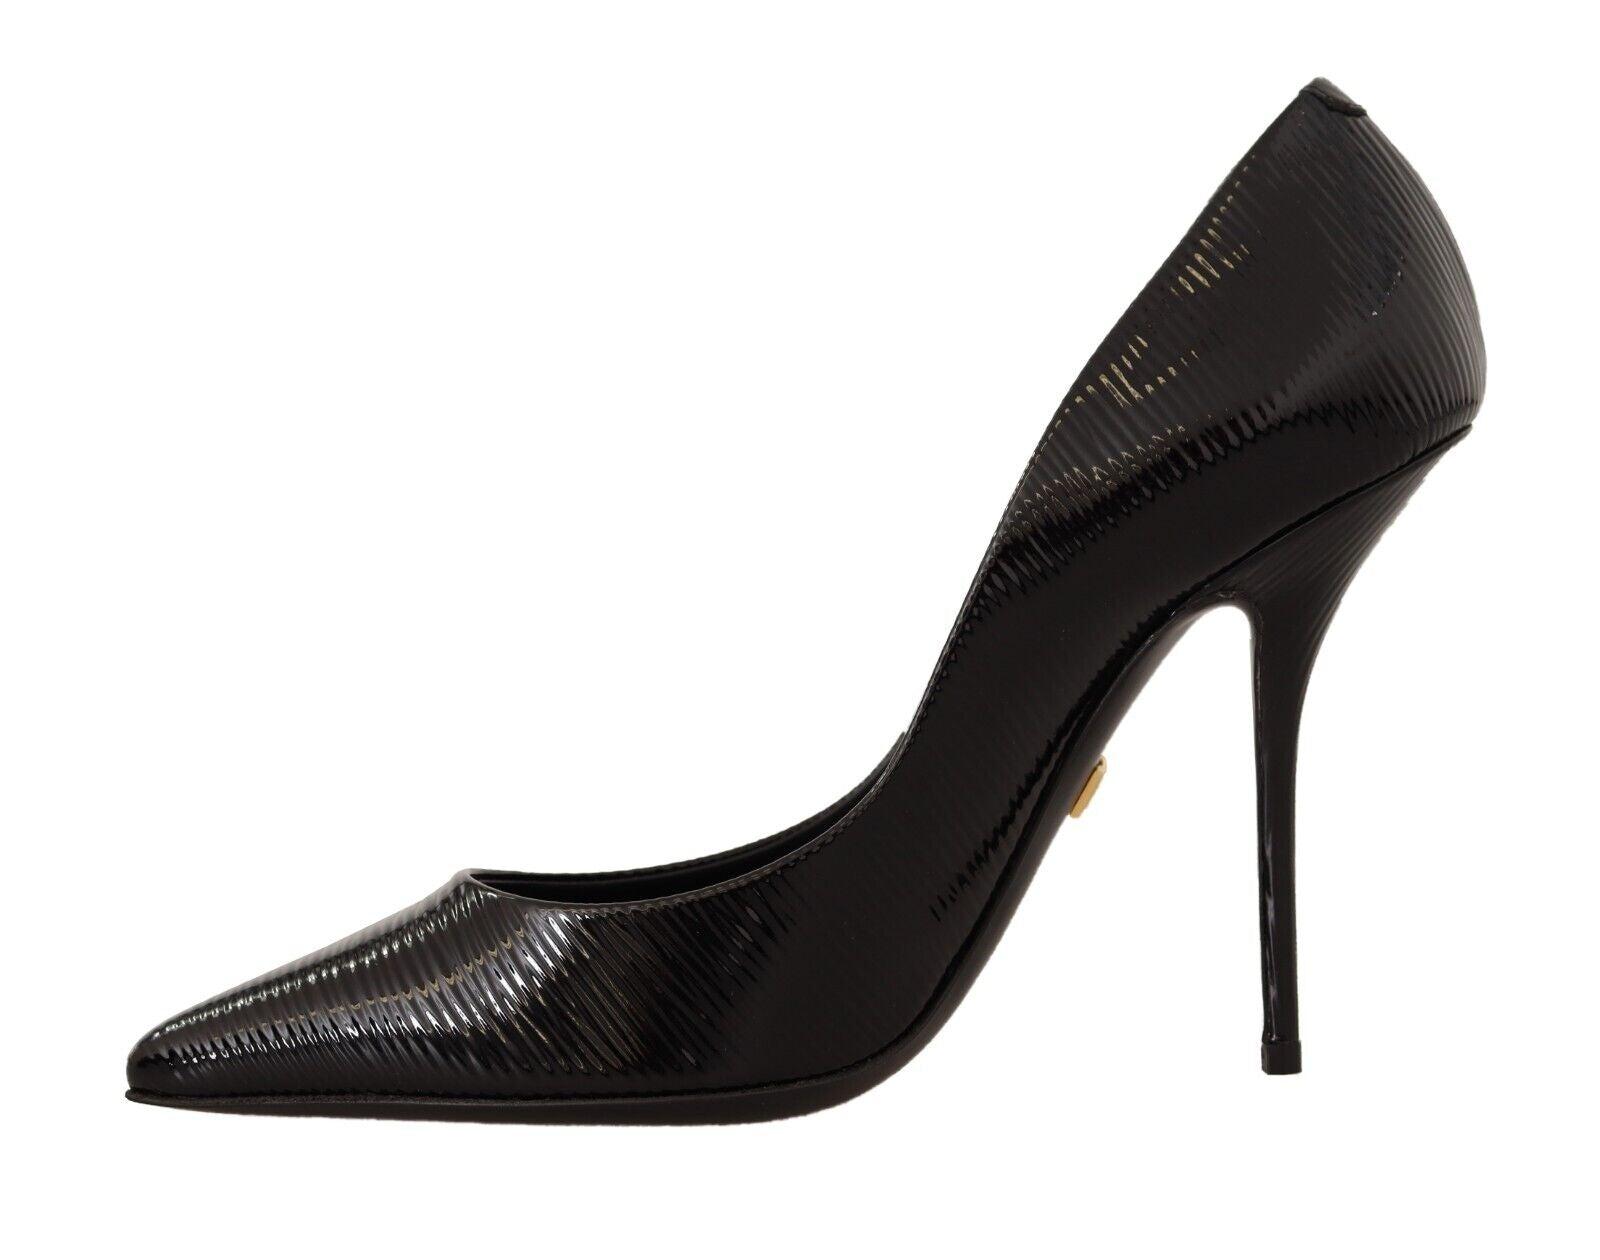 Dolce & Gabbana Black Leather Pointed Toe Heels Pumps Shoes | Lyst